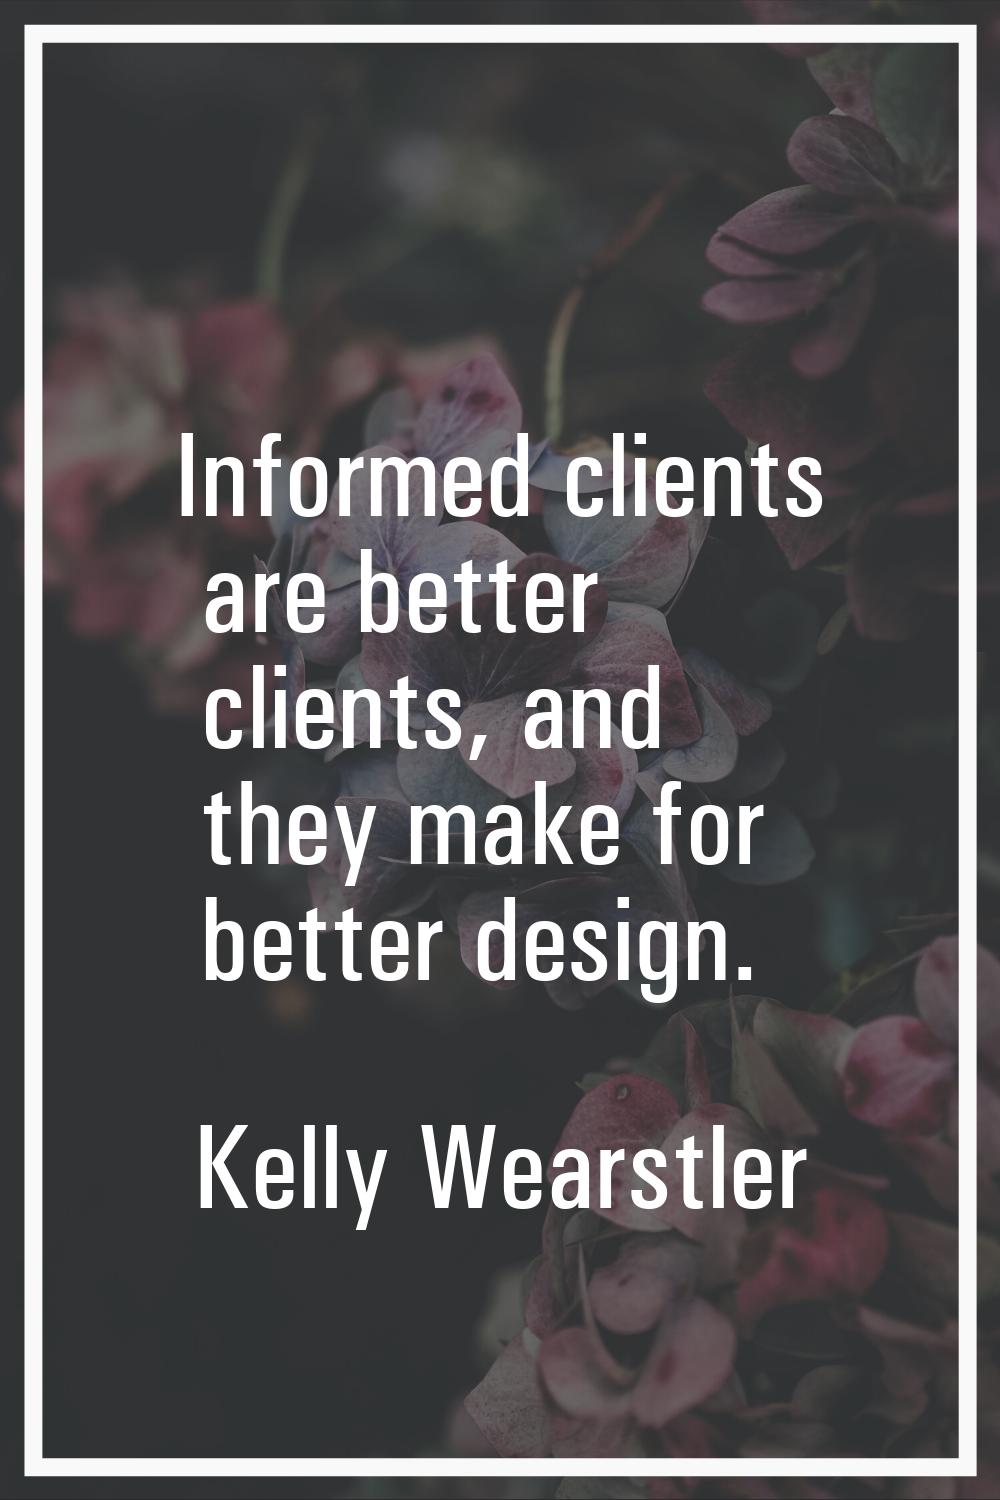 Informed clients are better clients, and they make for better design.